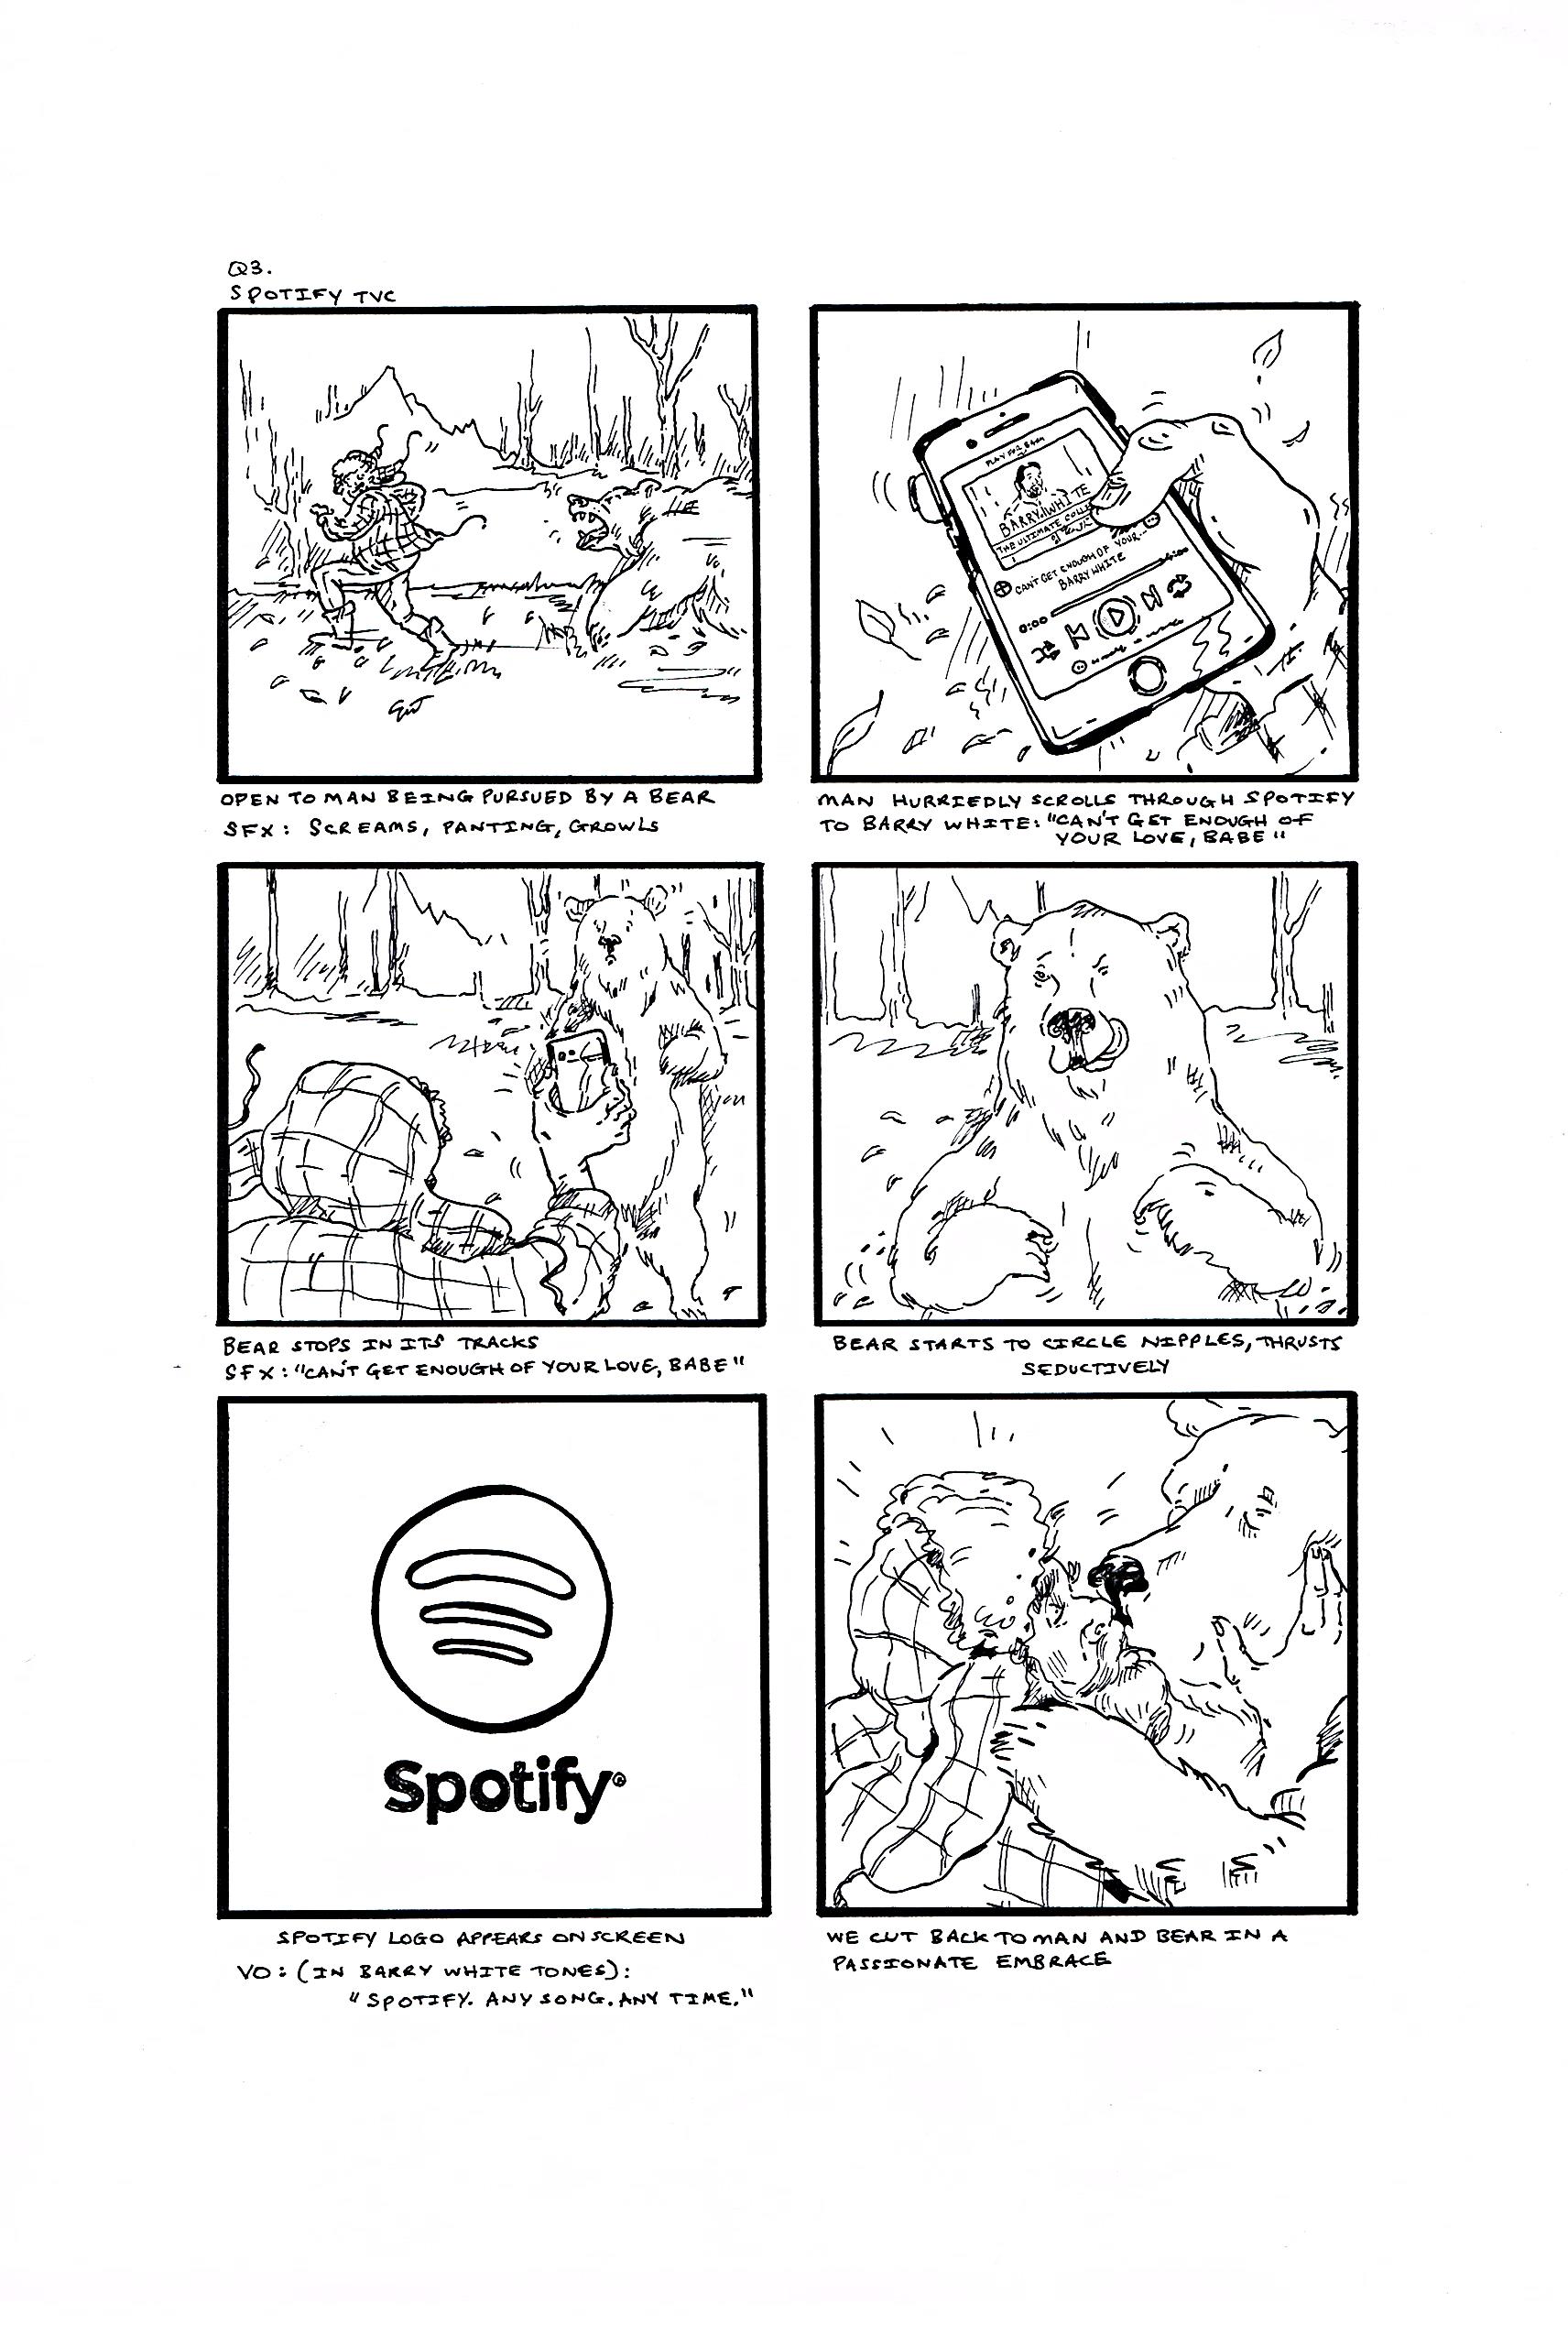 I decided to give the Spotify SMP: 'Listen to music anytime, anywhere' a bit of a kick...queue 'Sexual Bear'.&nbsp;